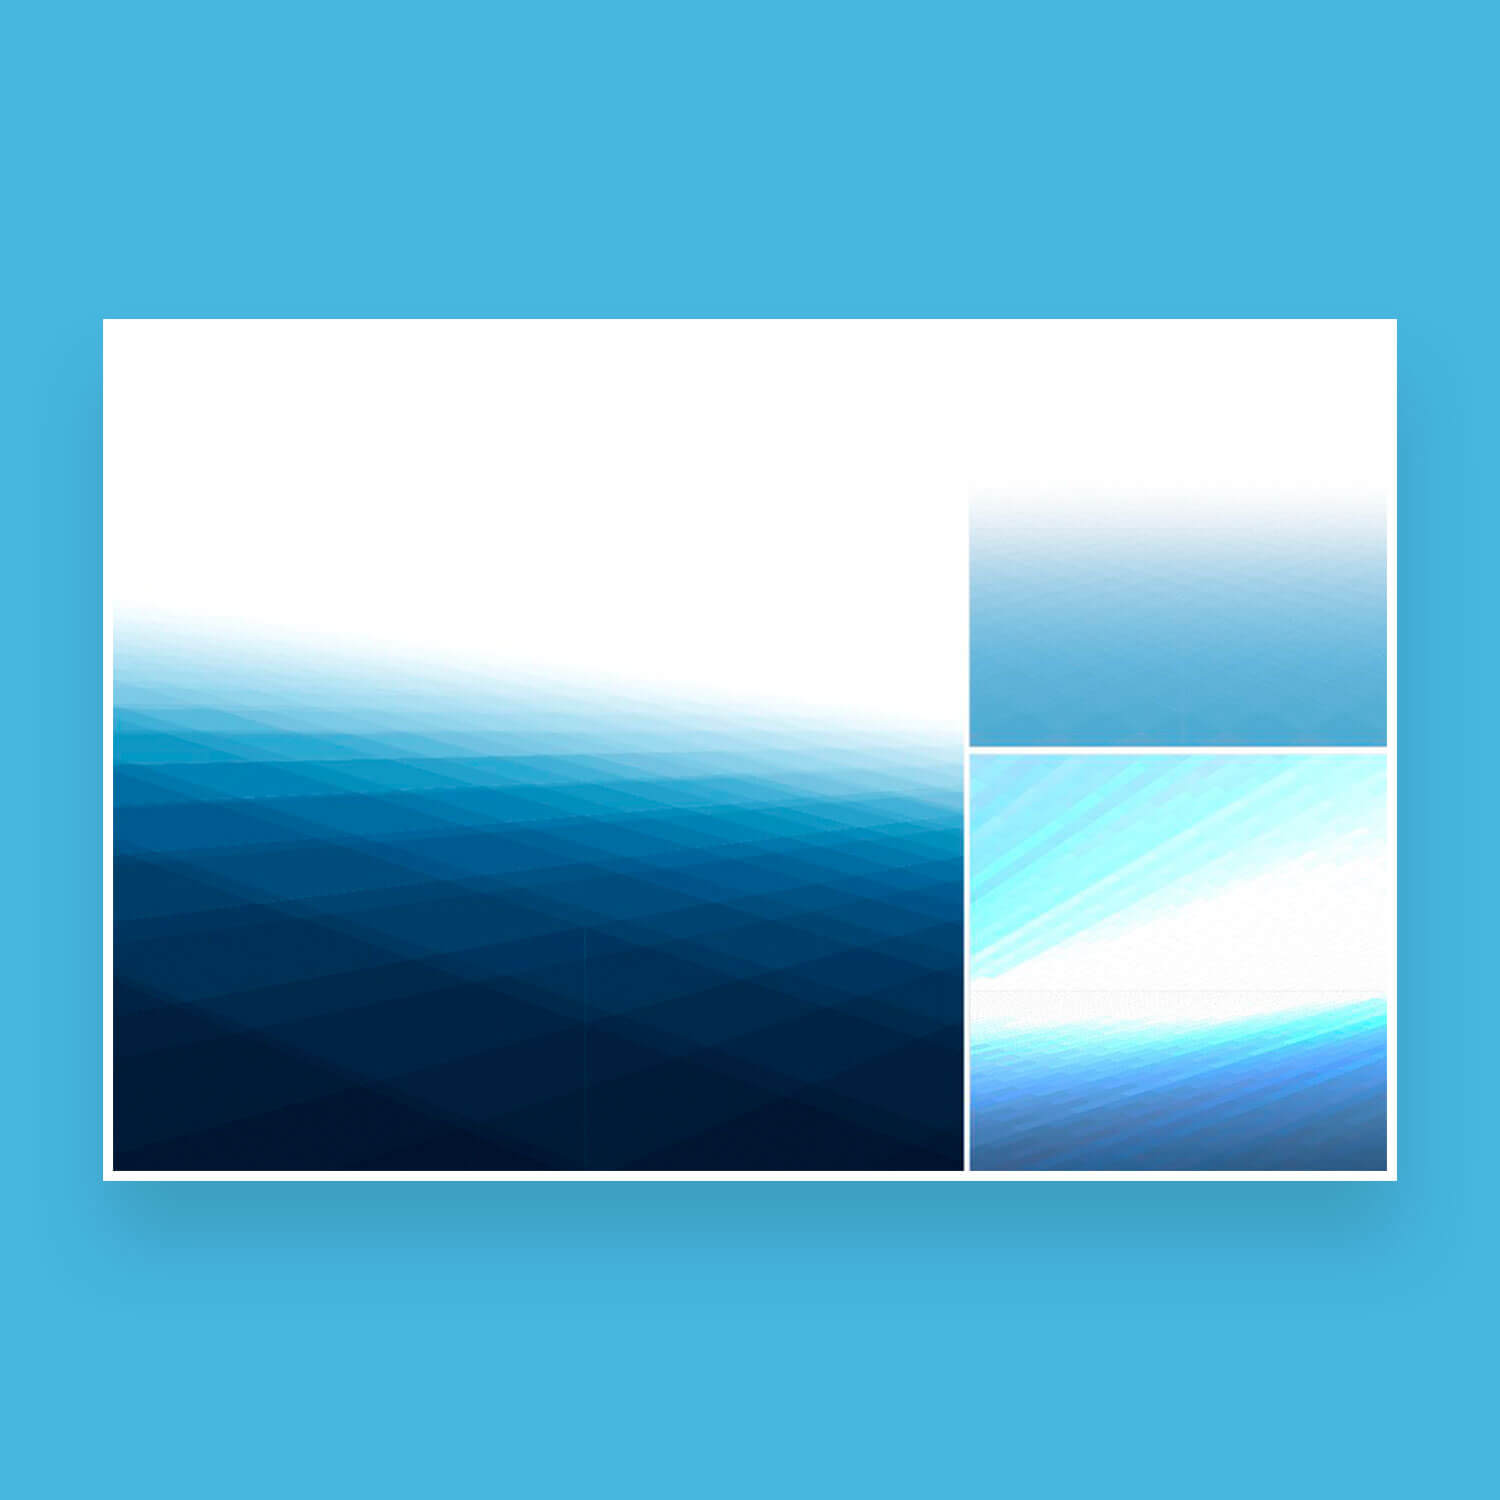 Abstract perspective background - three options with a blue gradient.